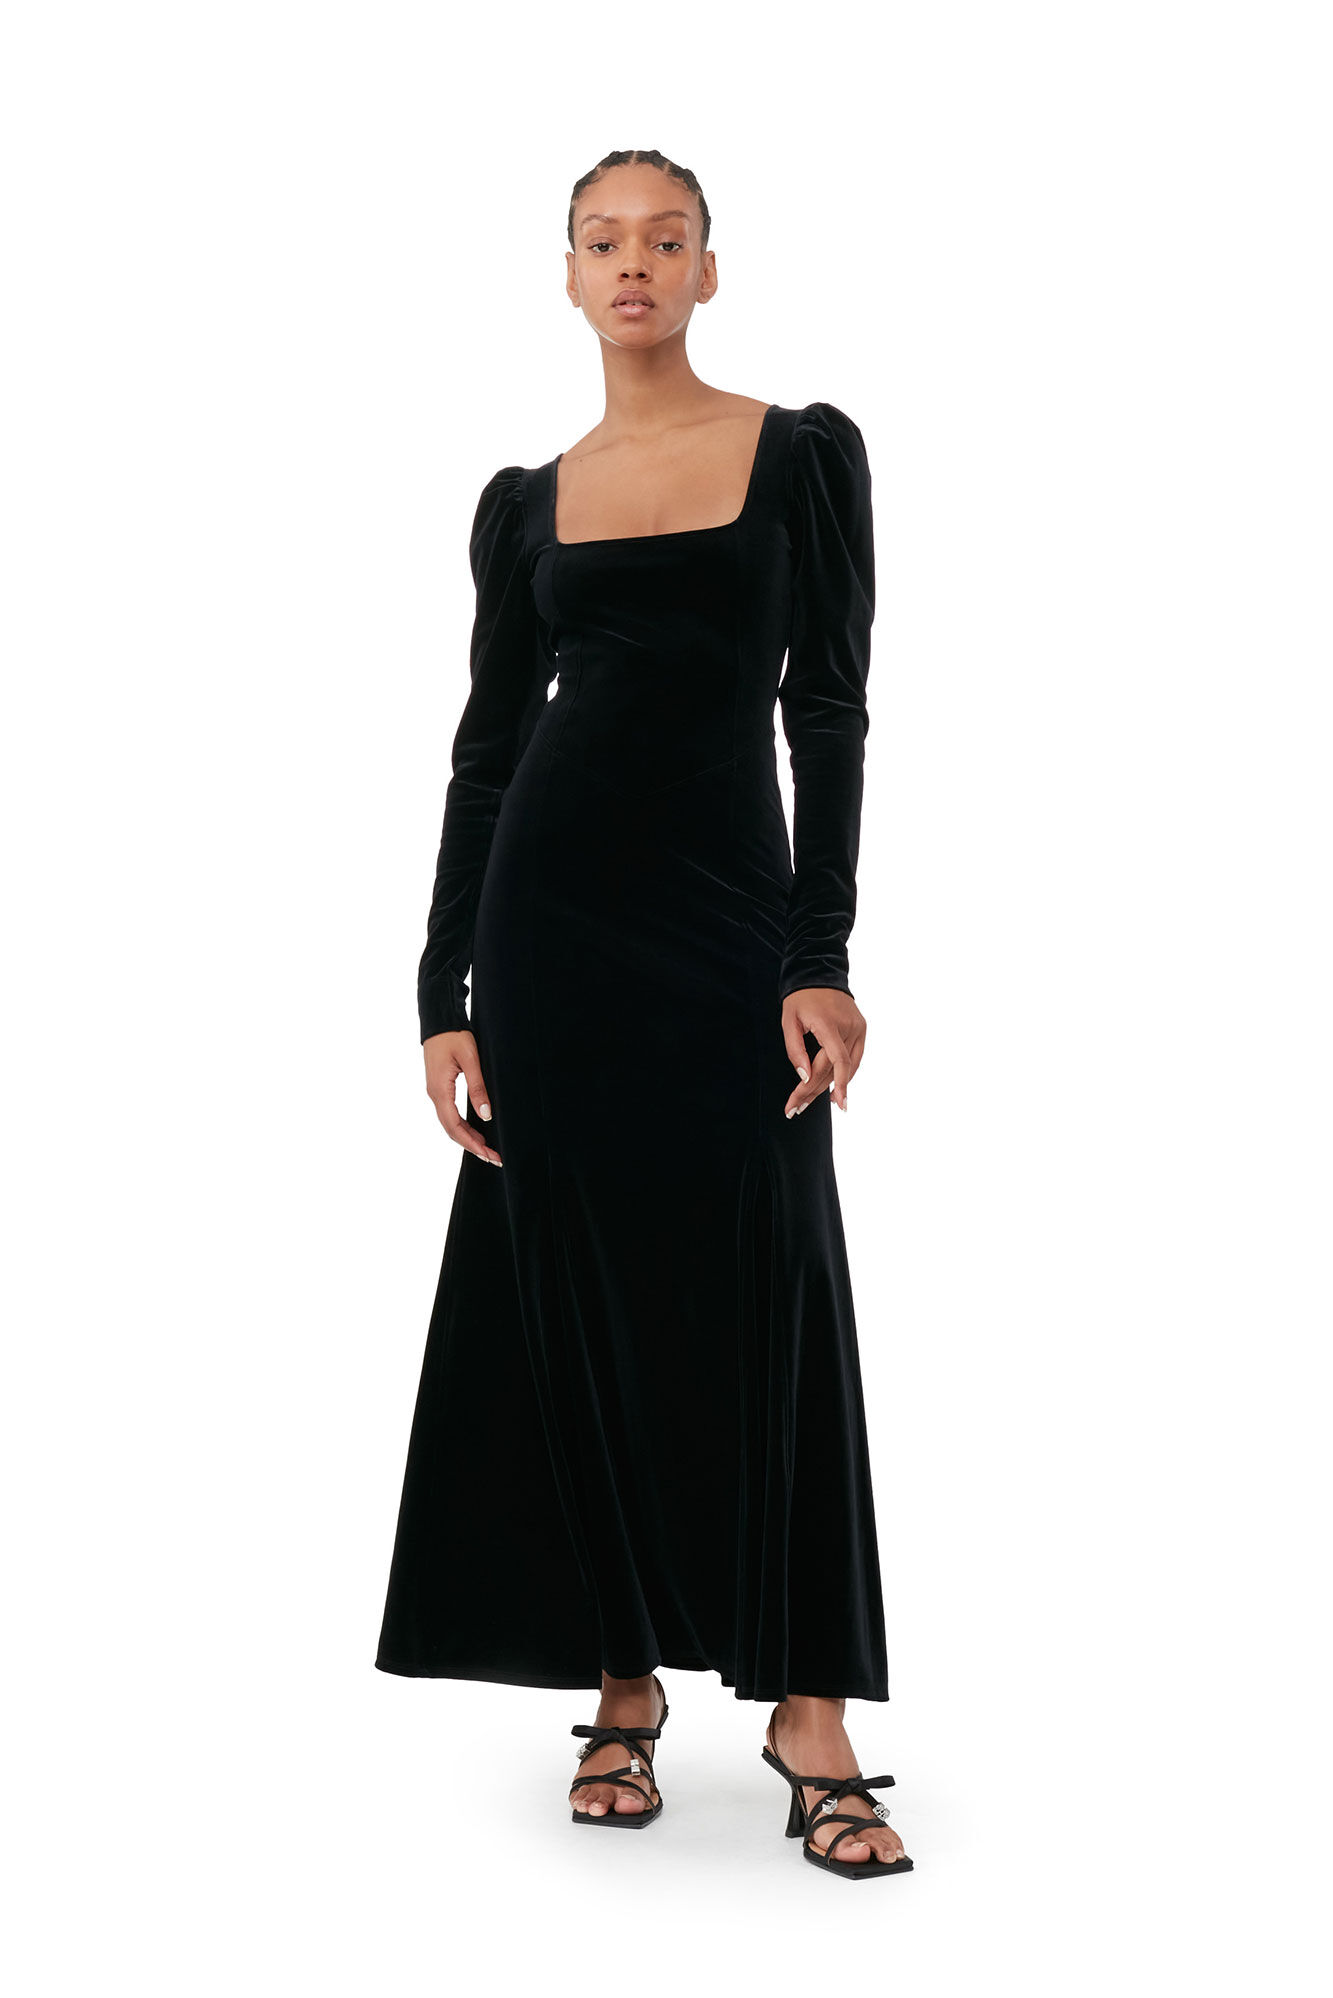 Plus Size Black Velvet Mermaid Black Velvet Evening Gown With Sweetheart  Neckline, Long Sleeves, And Appliqued Sweep Train Perfect For African Prom  And Formal Events From Weddingteam, $119.65 | DHgate.Com